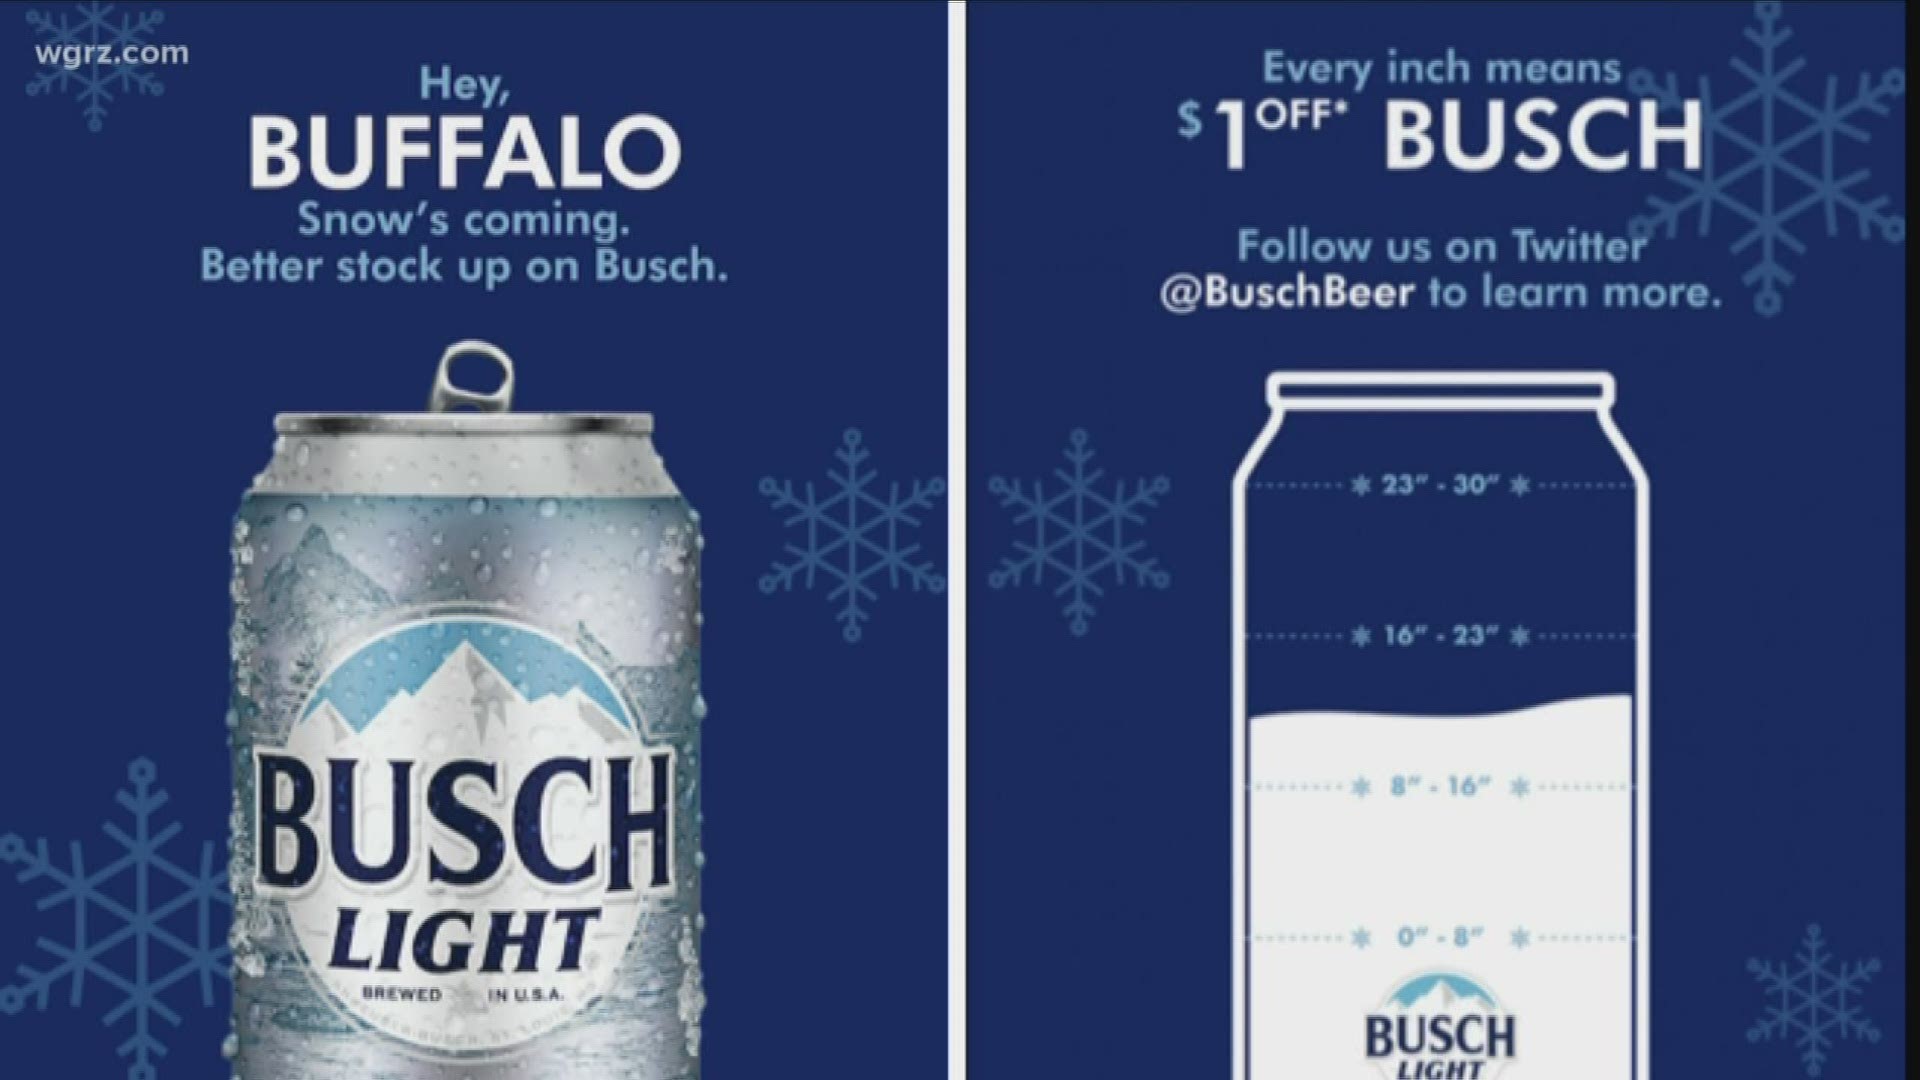 busch-beer-offers-1-rebate-for-every-inch-of-snow-in-minneapolis-wgrz